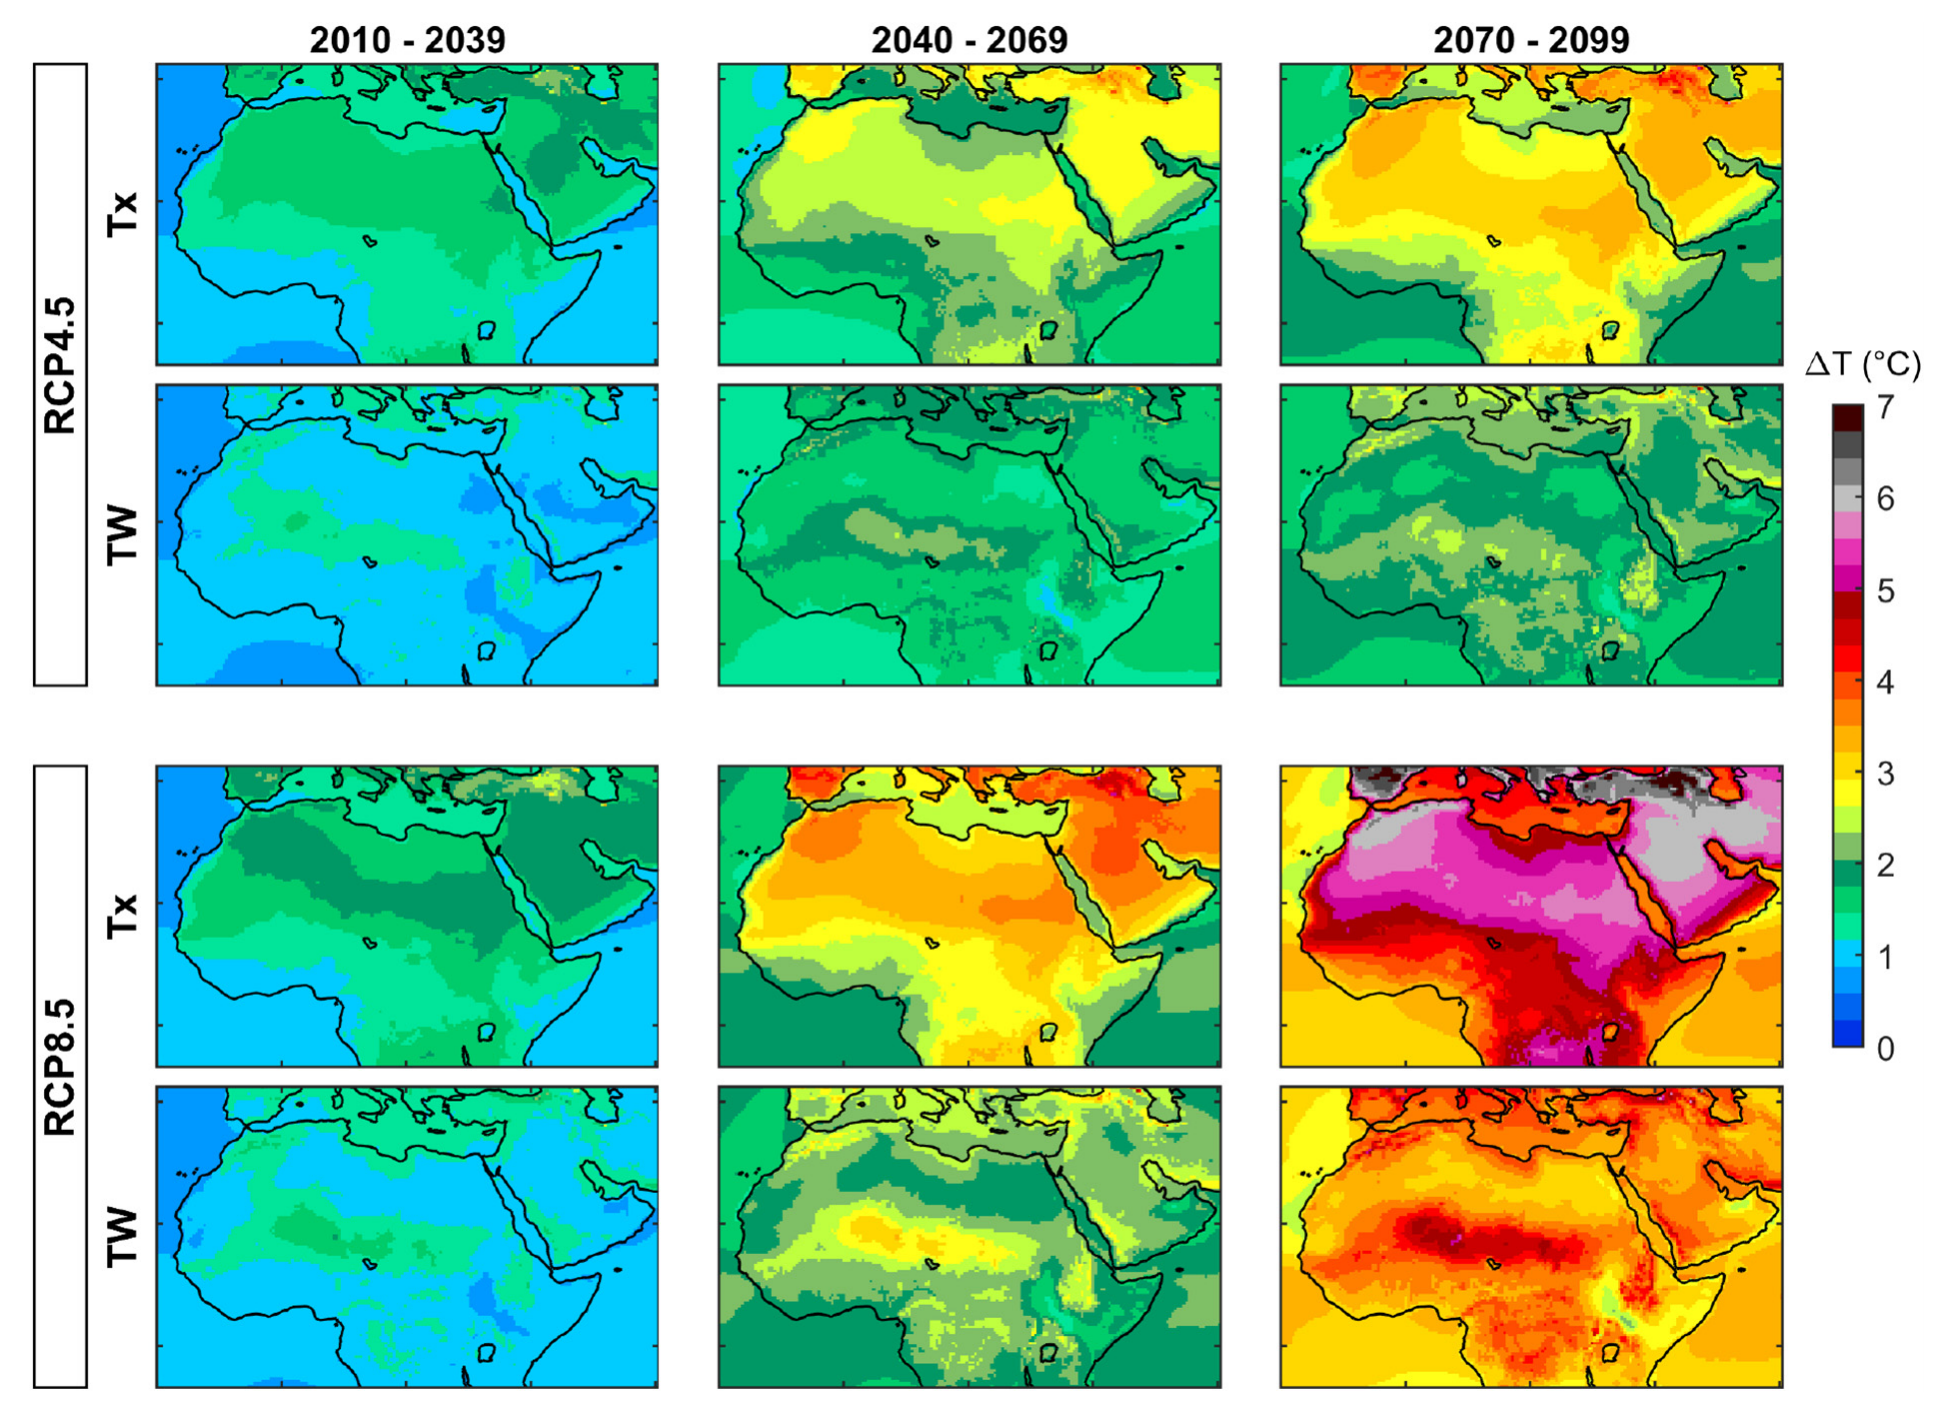 Decadal mean changes of maximum near-surface air temperature (ΔTx) and wet-bulb temperature (ΔTW) for 30-year future periods in the Middle East and North Africa. The figure is generated using the results of the ensemble mean of 17 RCMs. Graphic: Ahmadalipour Moradkhani, 2018 / Environment International